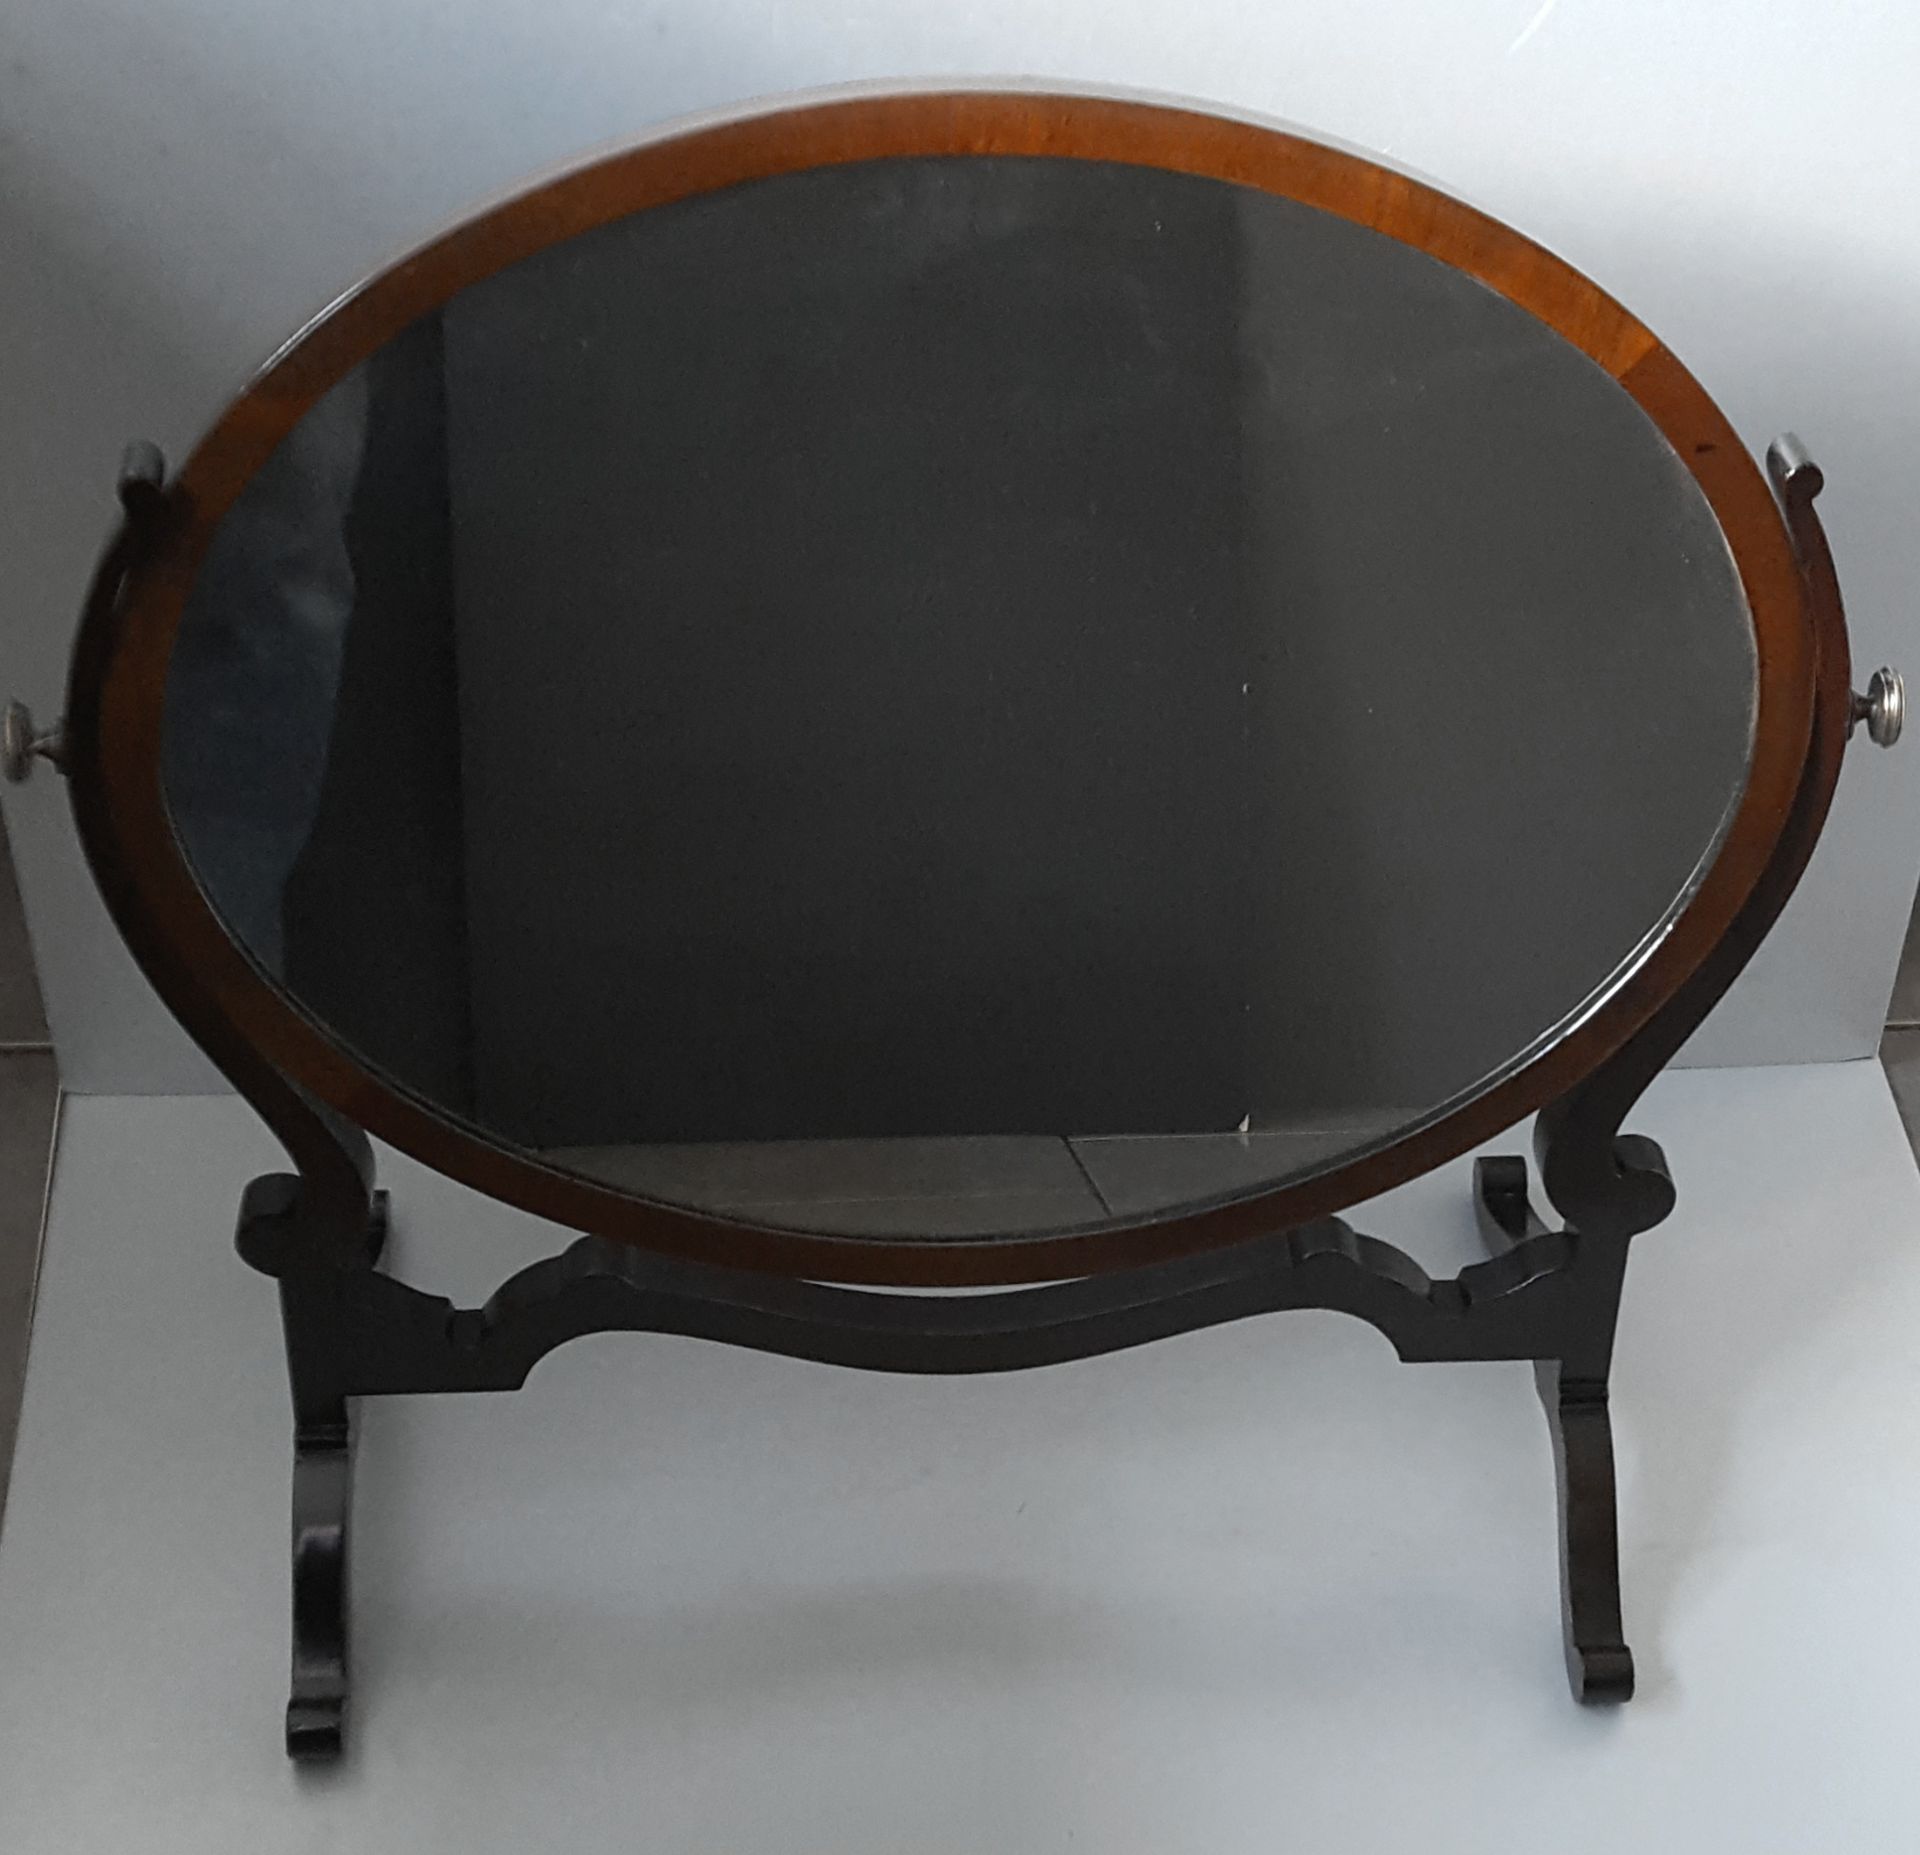 Antique Edwardian Table Top Swivel Mirror - Image 2 of 2